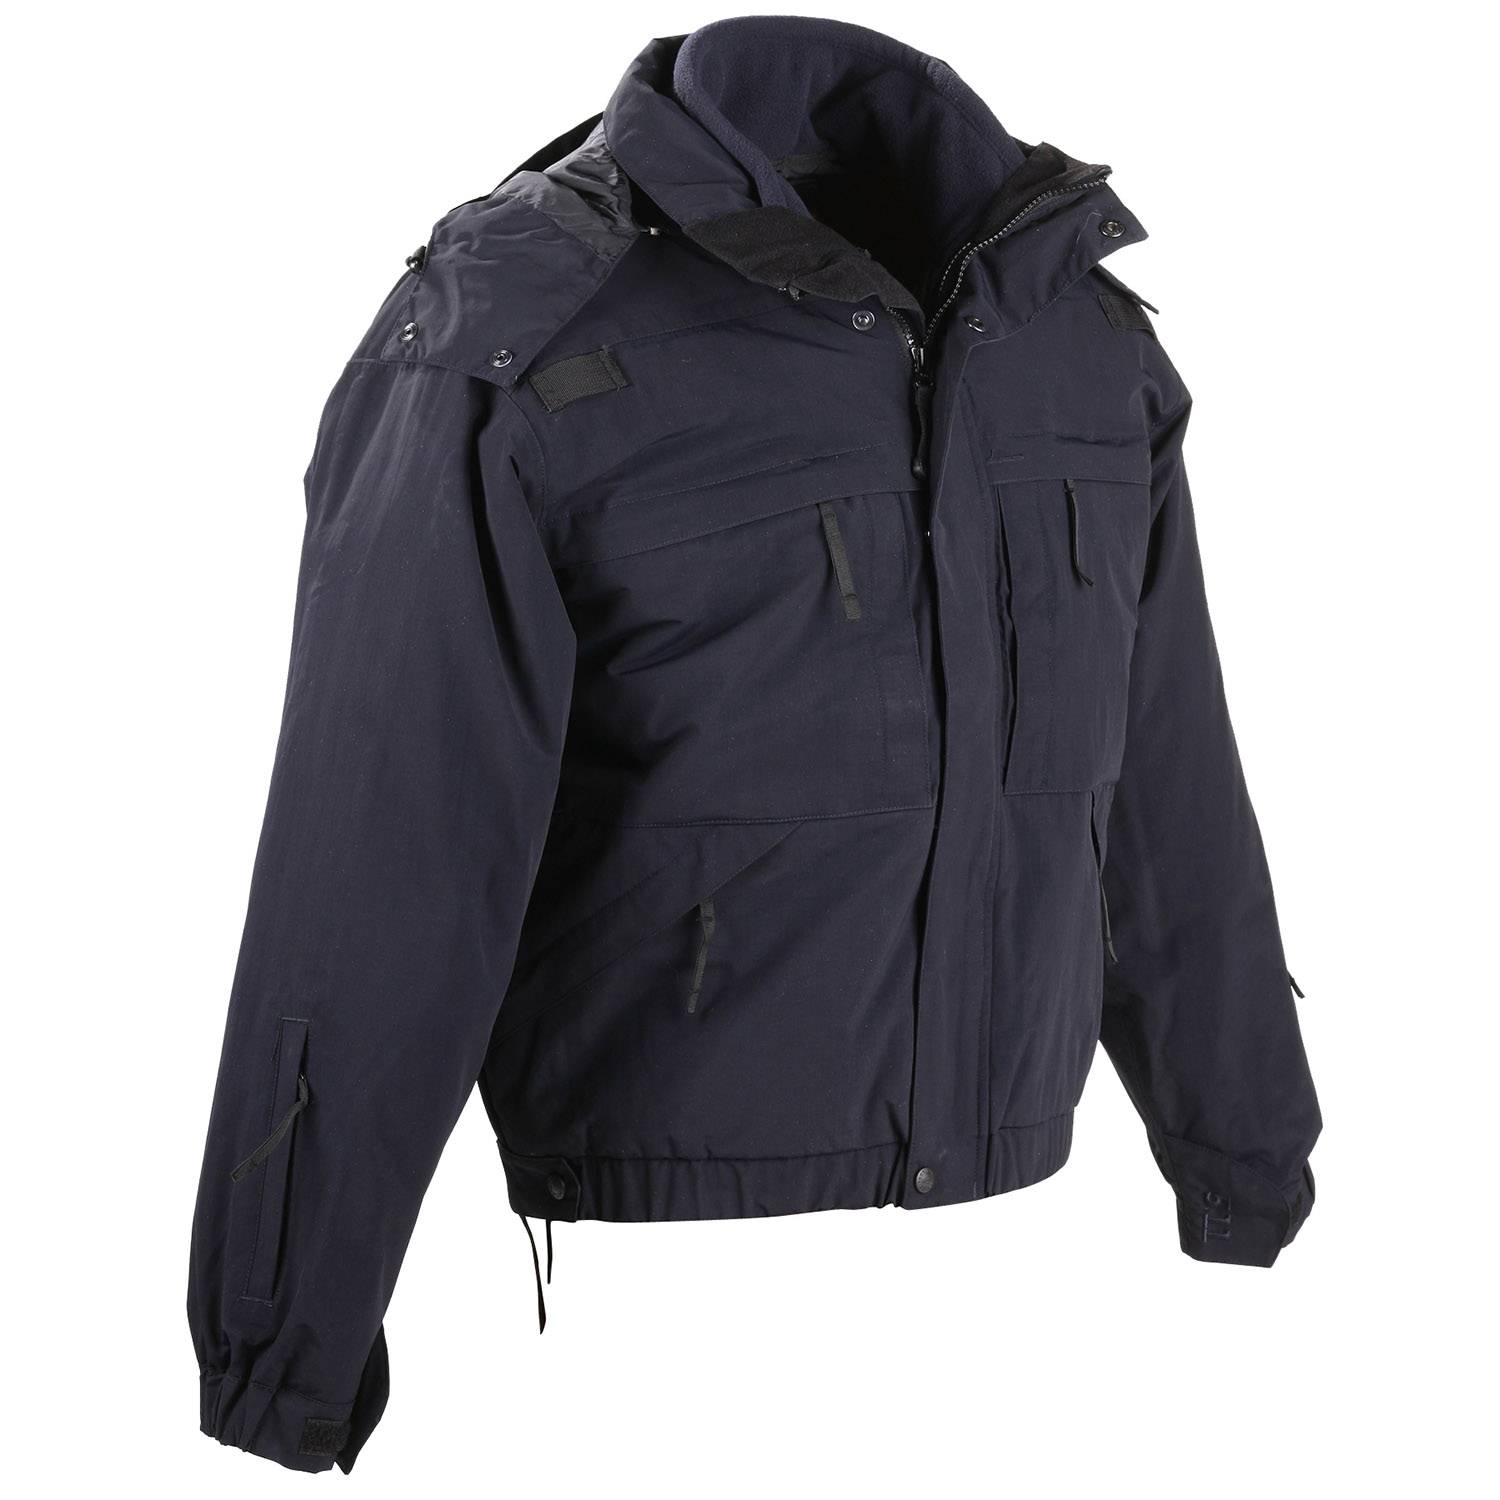 5.11 Tactical 5-in-1 Jacket